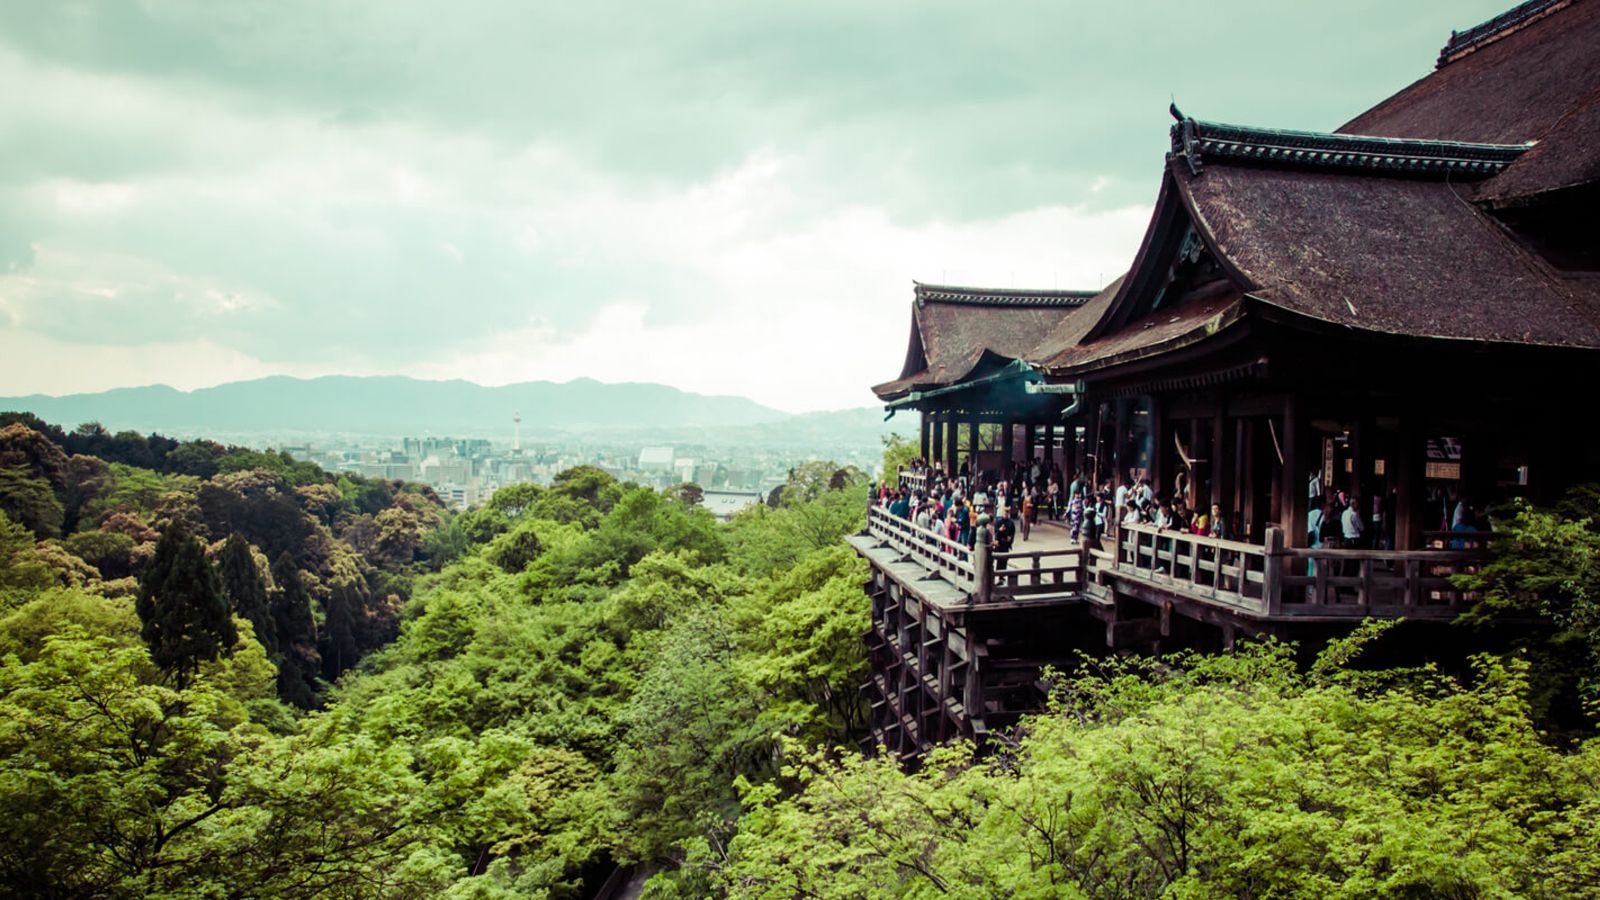 Old Japanese hillside temple with trees in foreground and city in distance